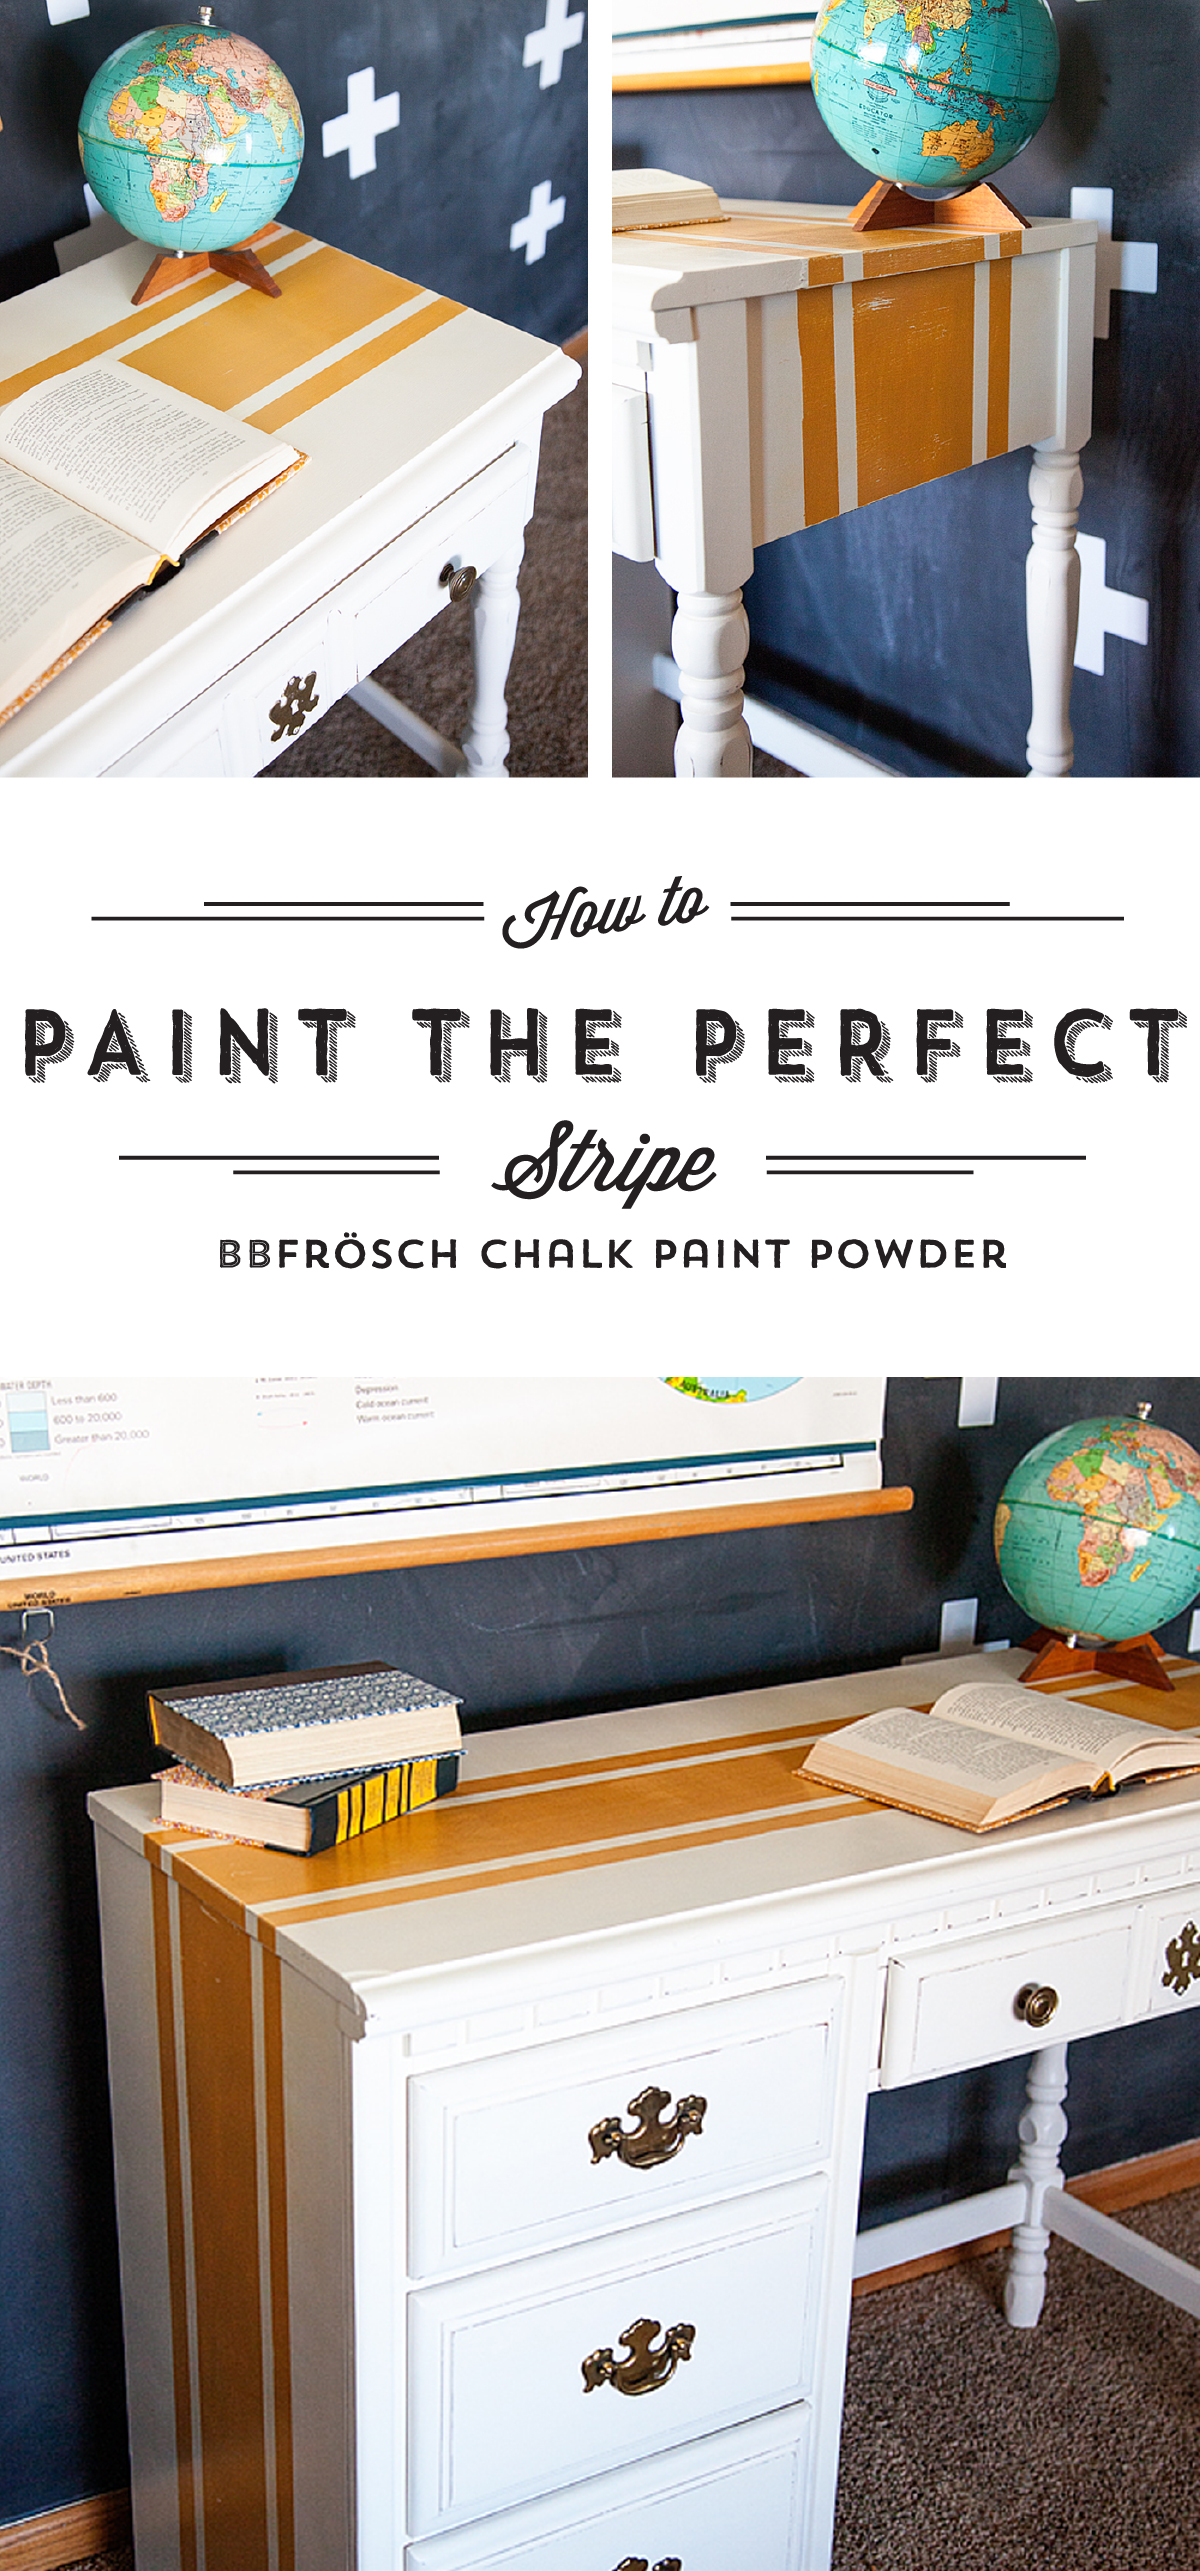 How-to-paint-perfect-stripes-with-BB-Frösch